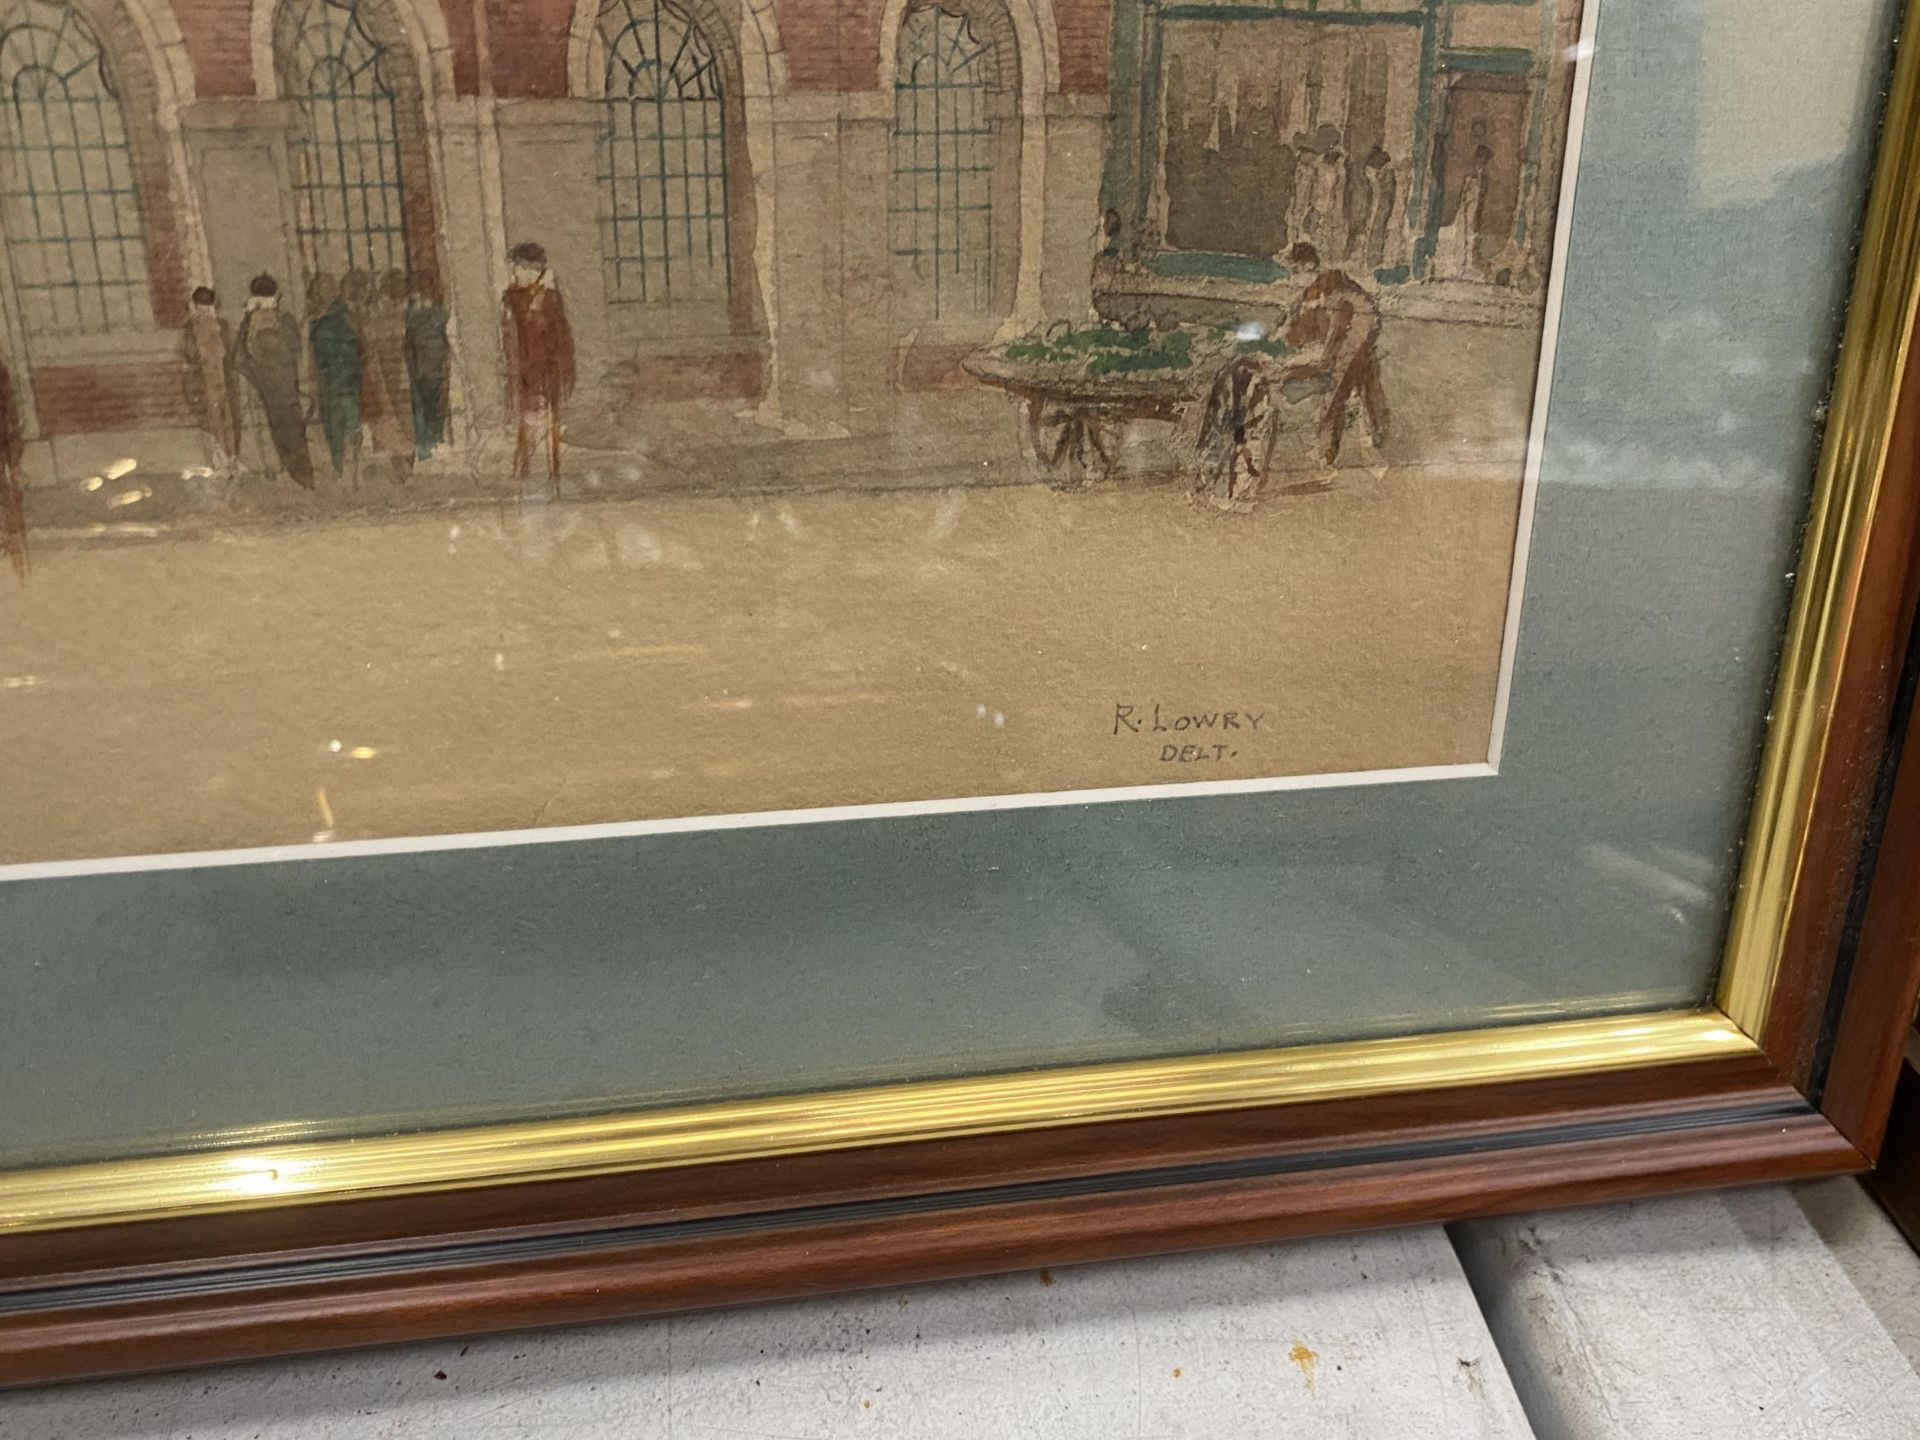 AN R.LOWRY SIGNED WATERCOLOUR OF WILLS & KAULA ARCHITECTS, 55 X 82CM - Image 3 of 3